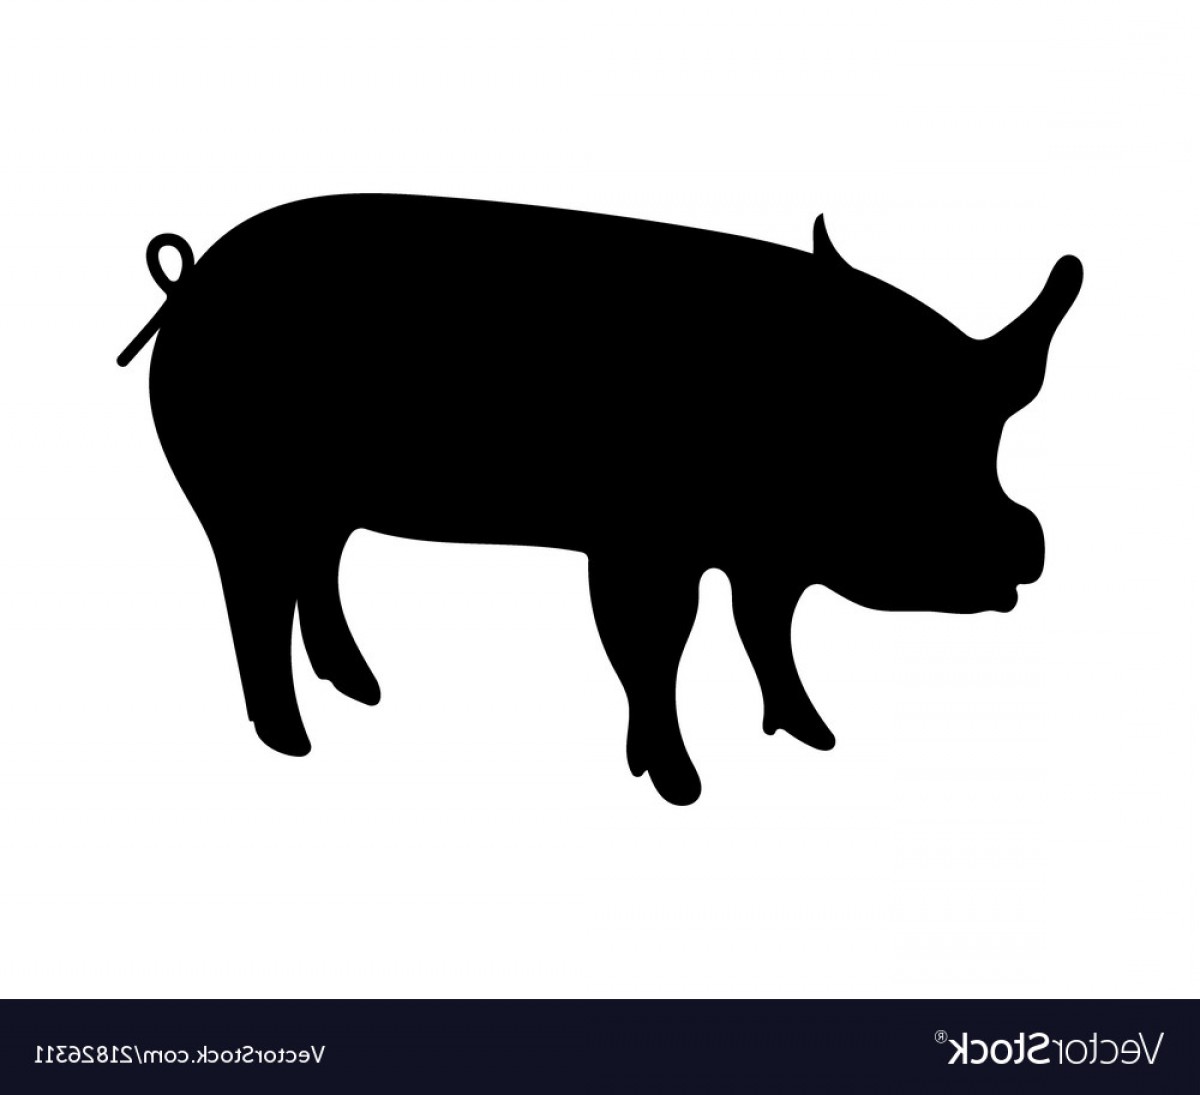 Download Pig Vector Image at Vectorified.com | Collection of Pig ...